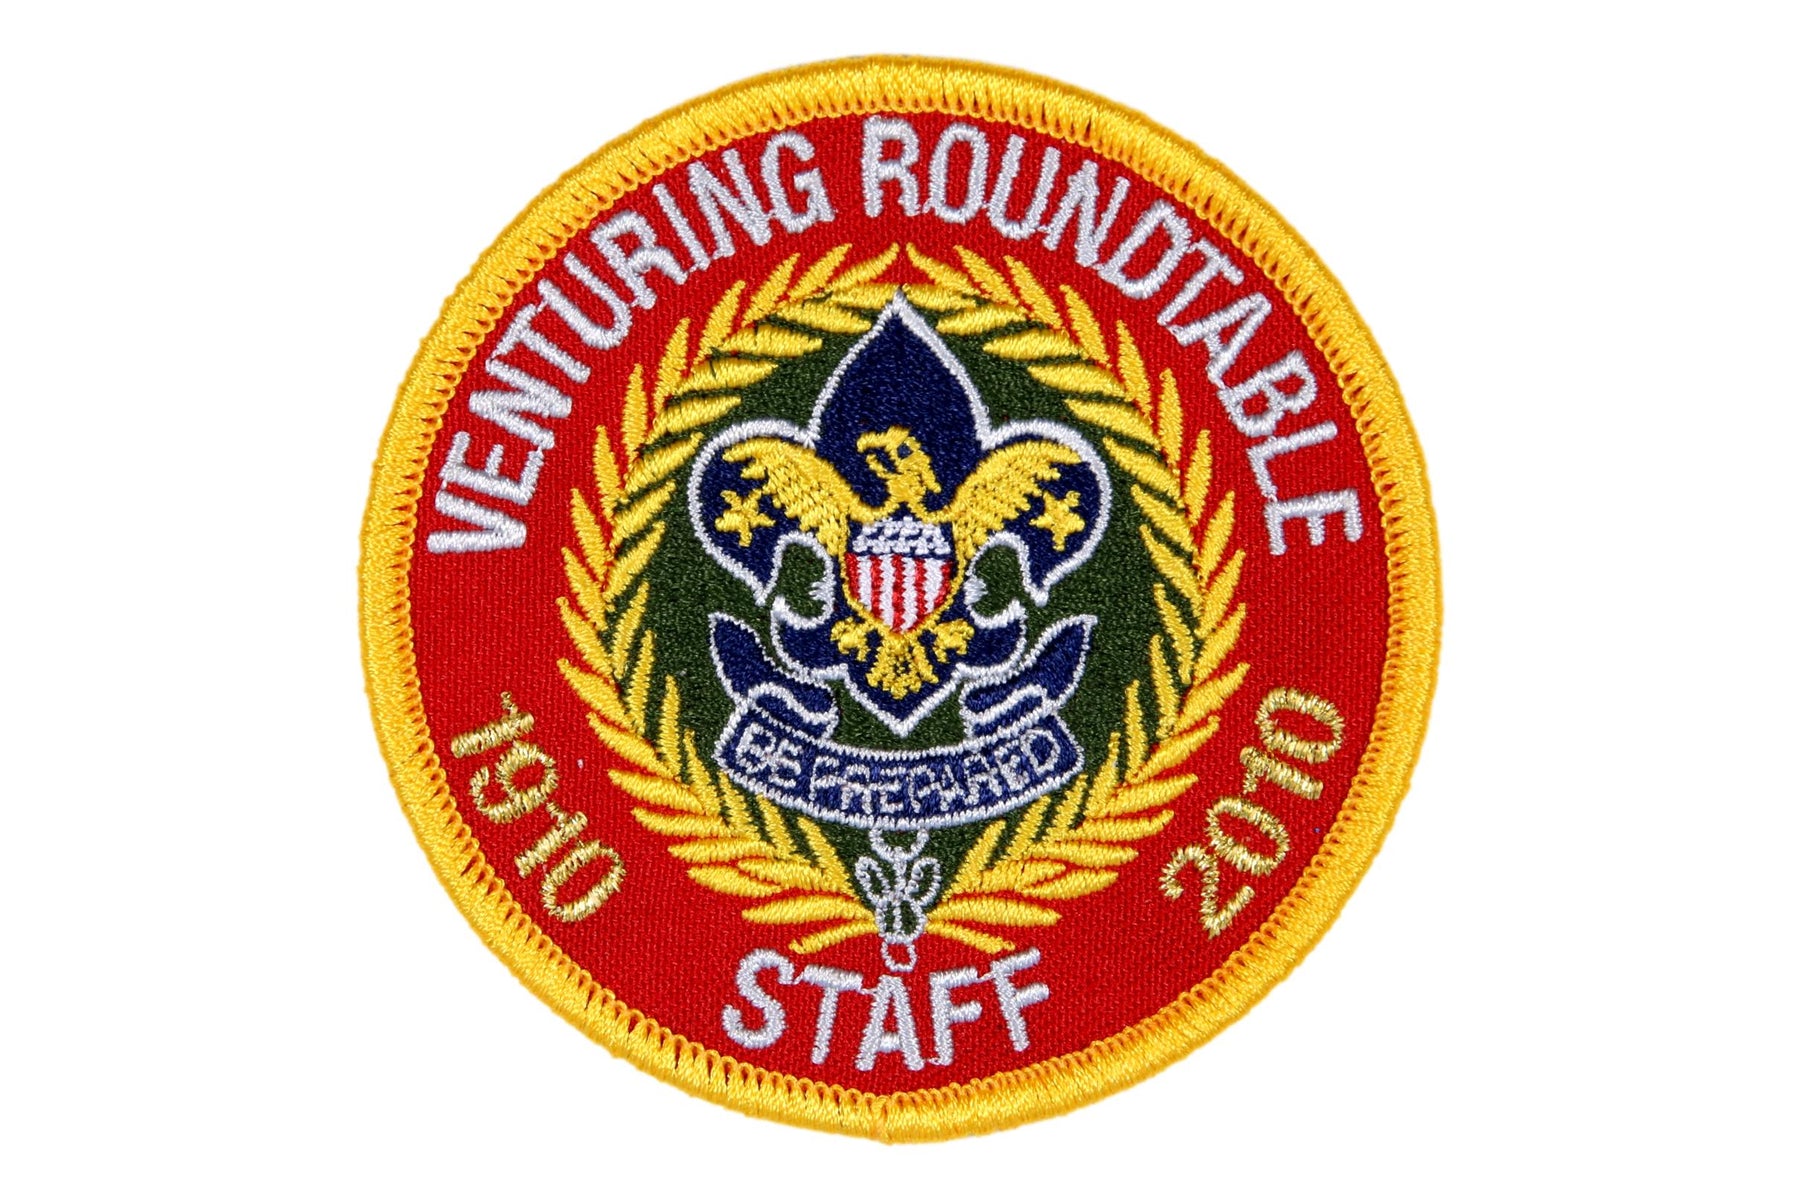 Venturing Roundtable Staff Patch 2010 SSB Back